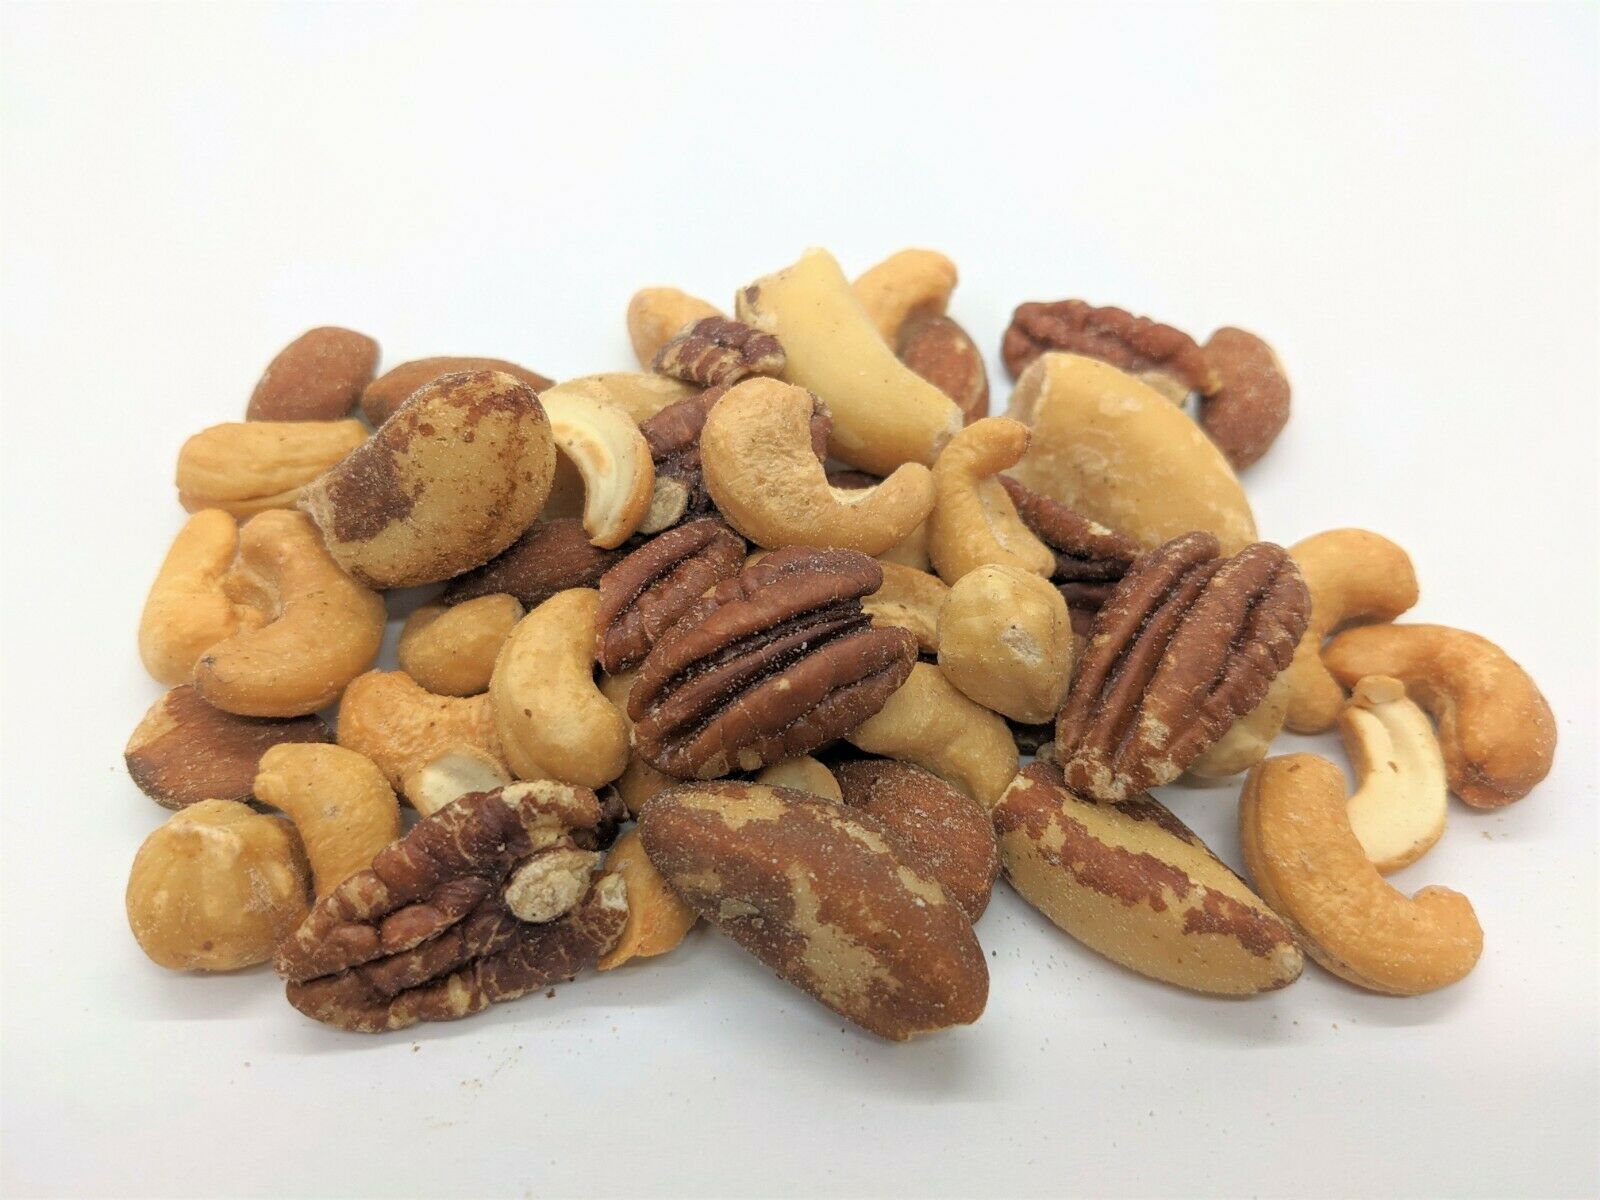 MIXED NUTS - Deluxe Roasted / Salted Mixed Nuts (NO PEANUTS!!!) - Select Weight